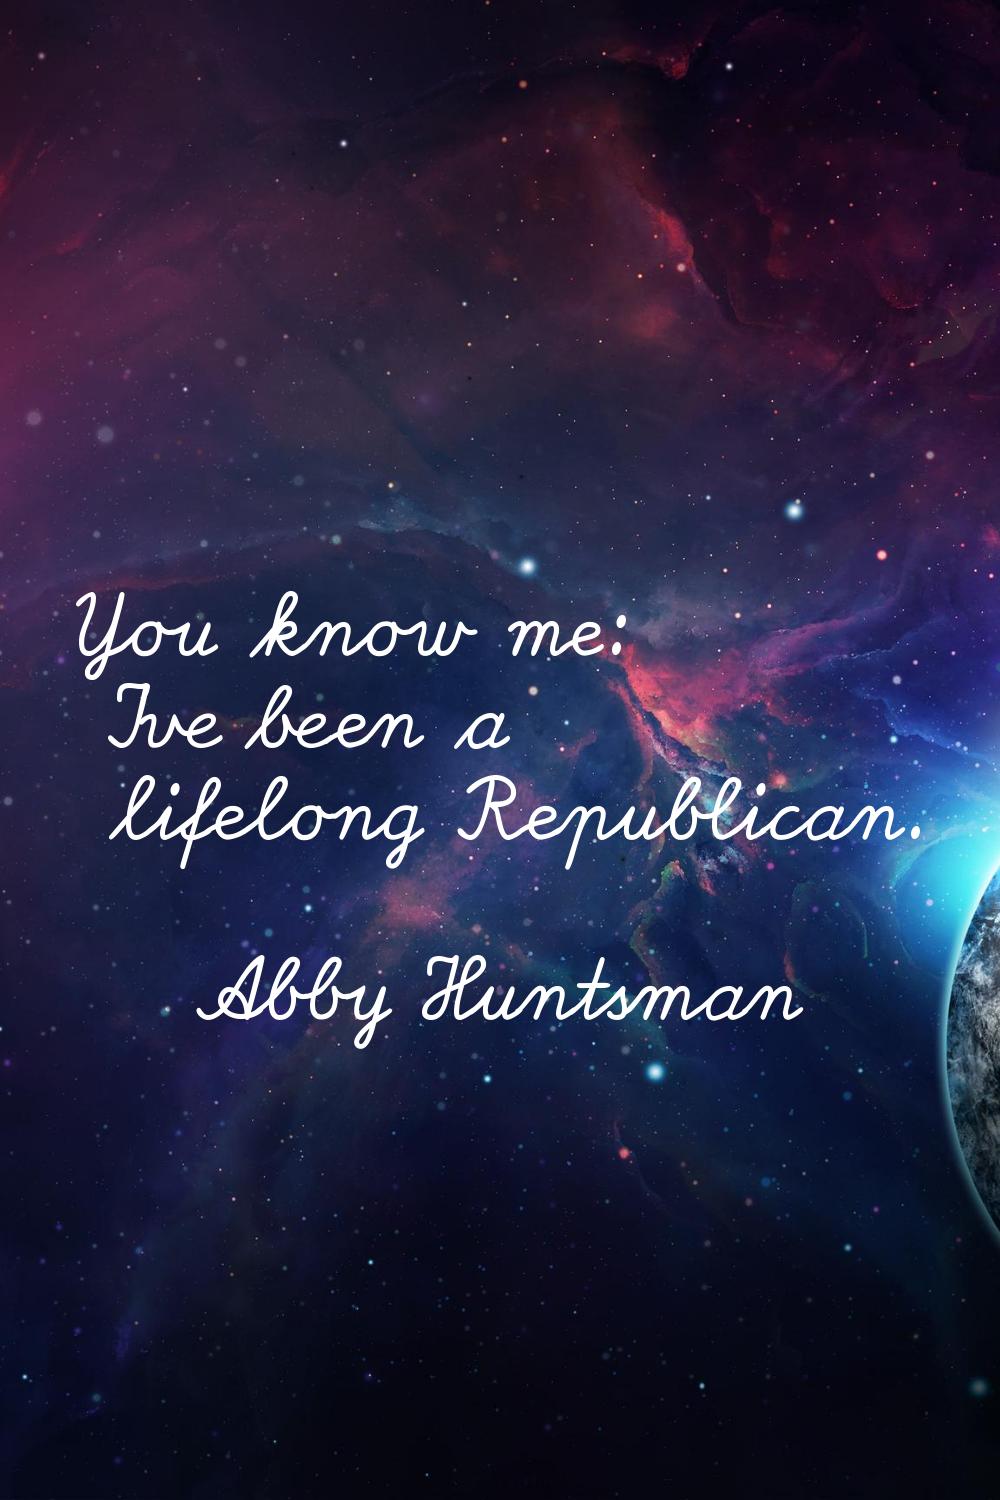 You know me: I've been a lifelong Republican.